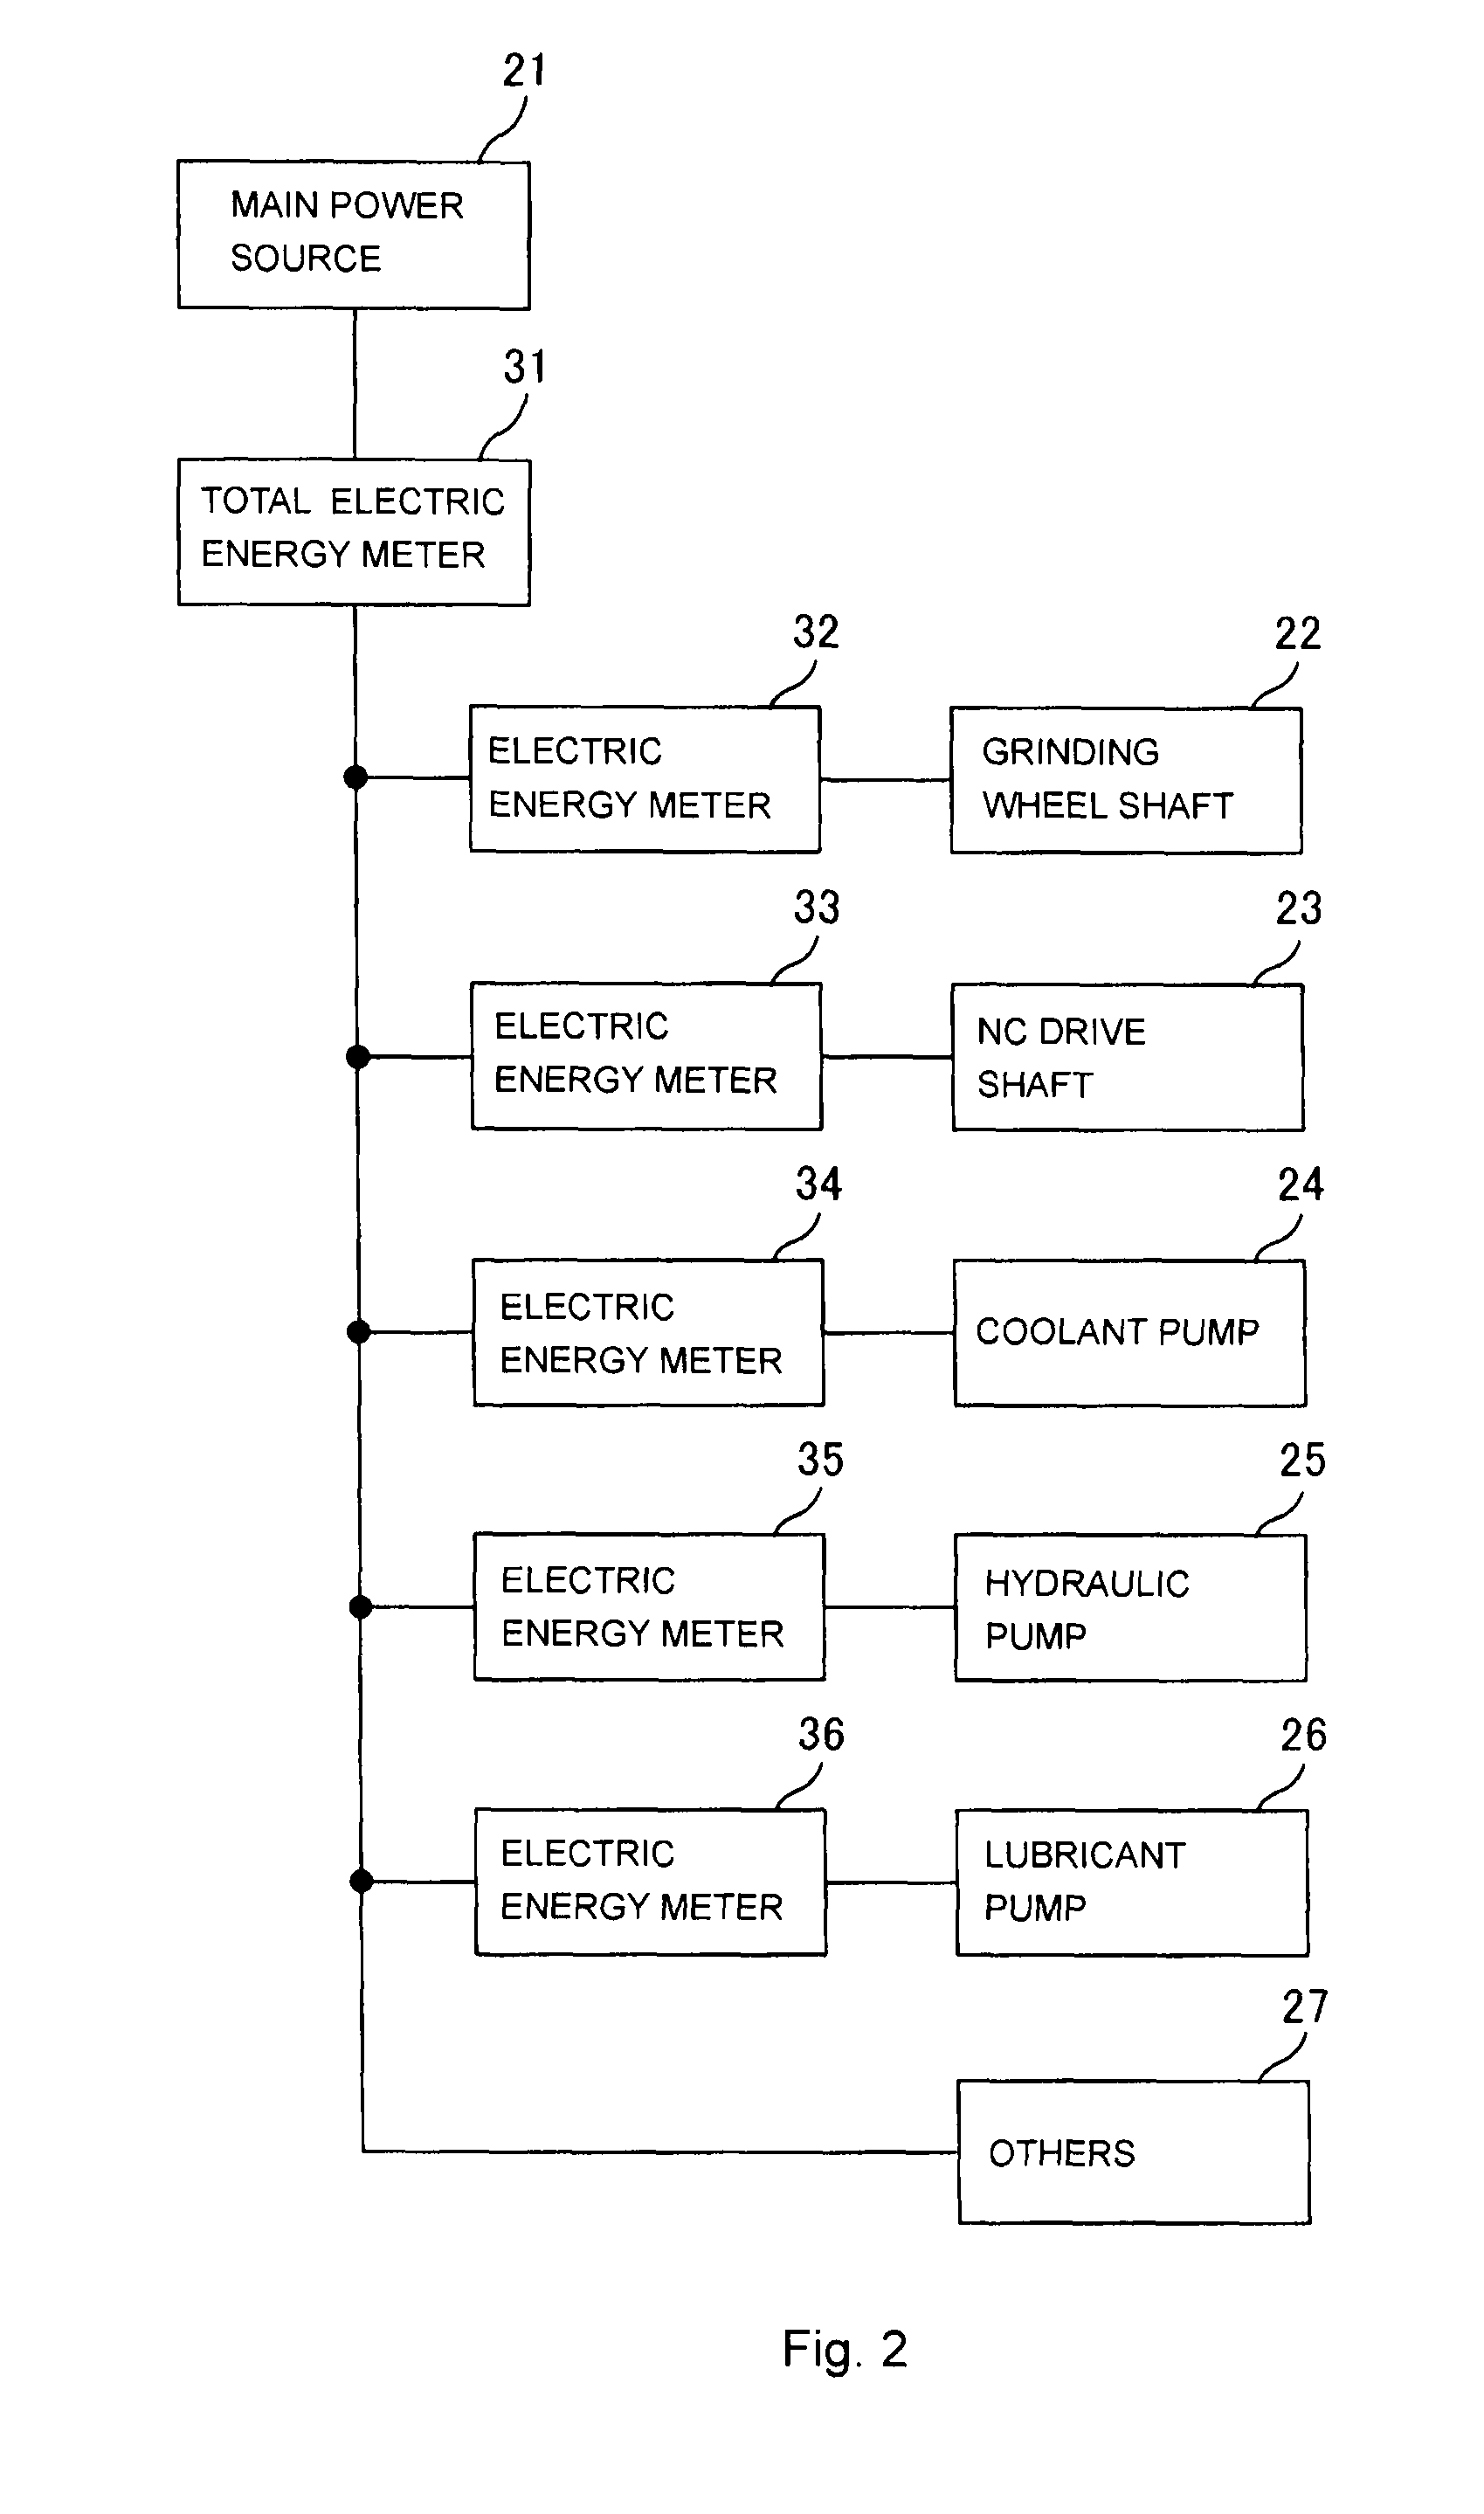 Power consumption display unit for machine tool